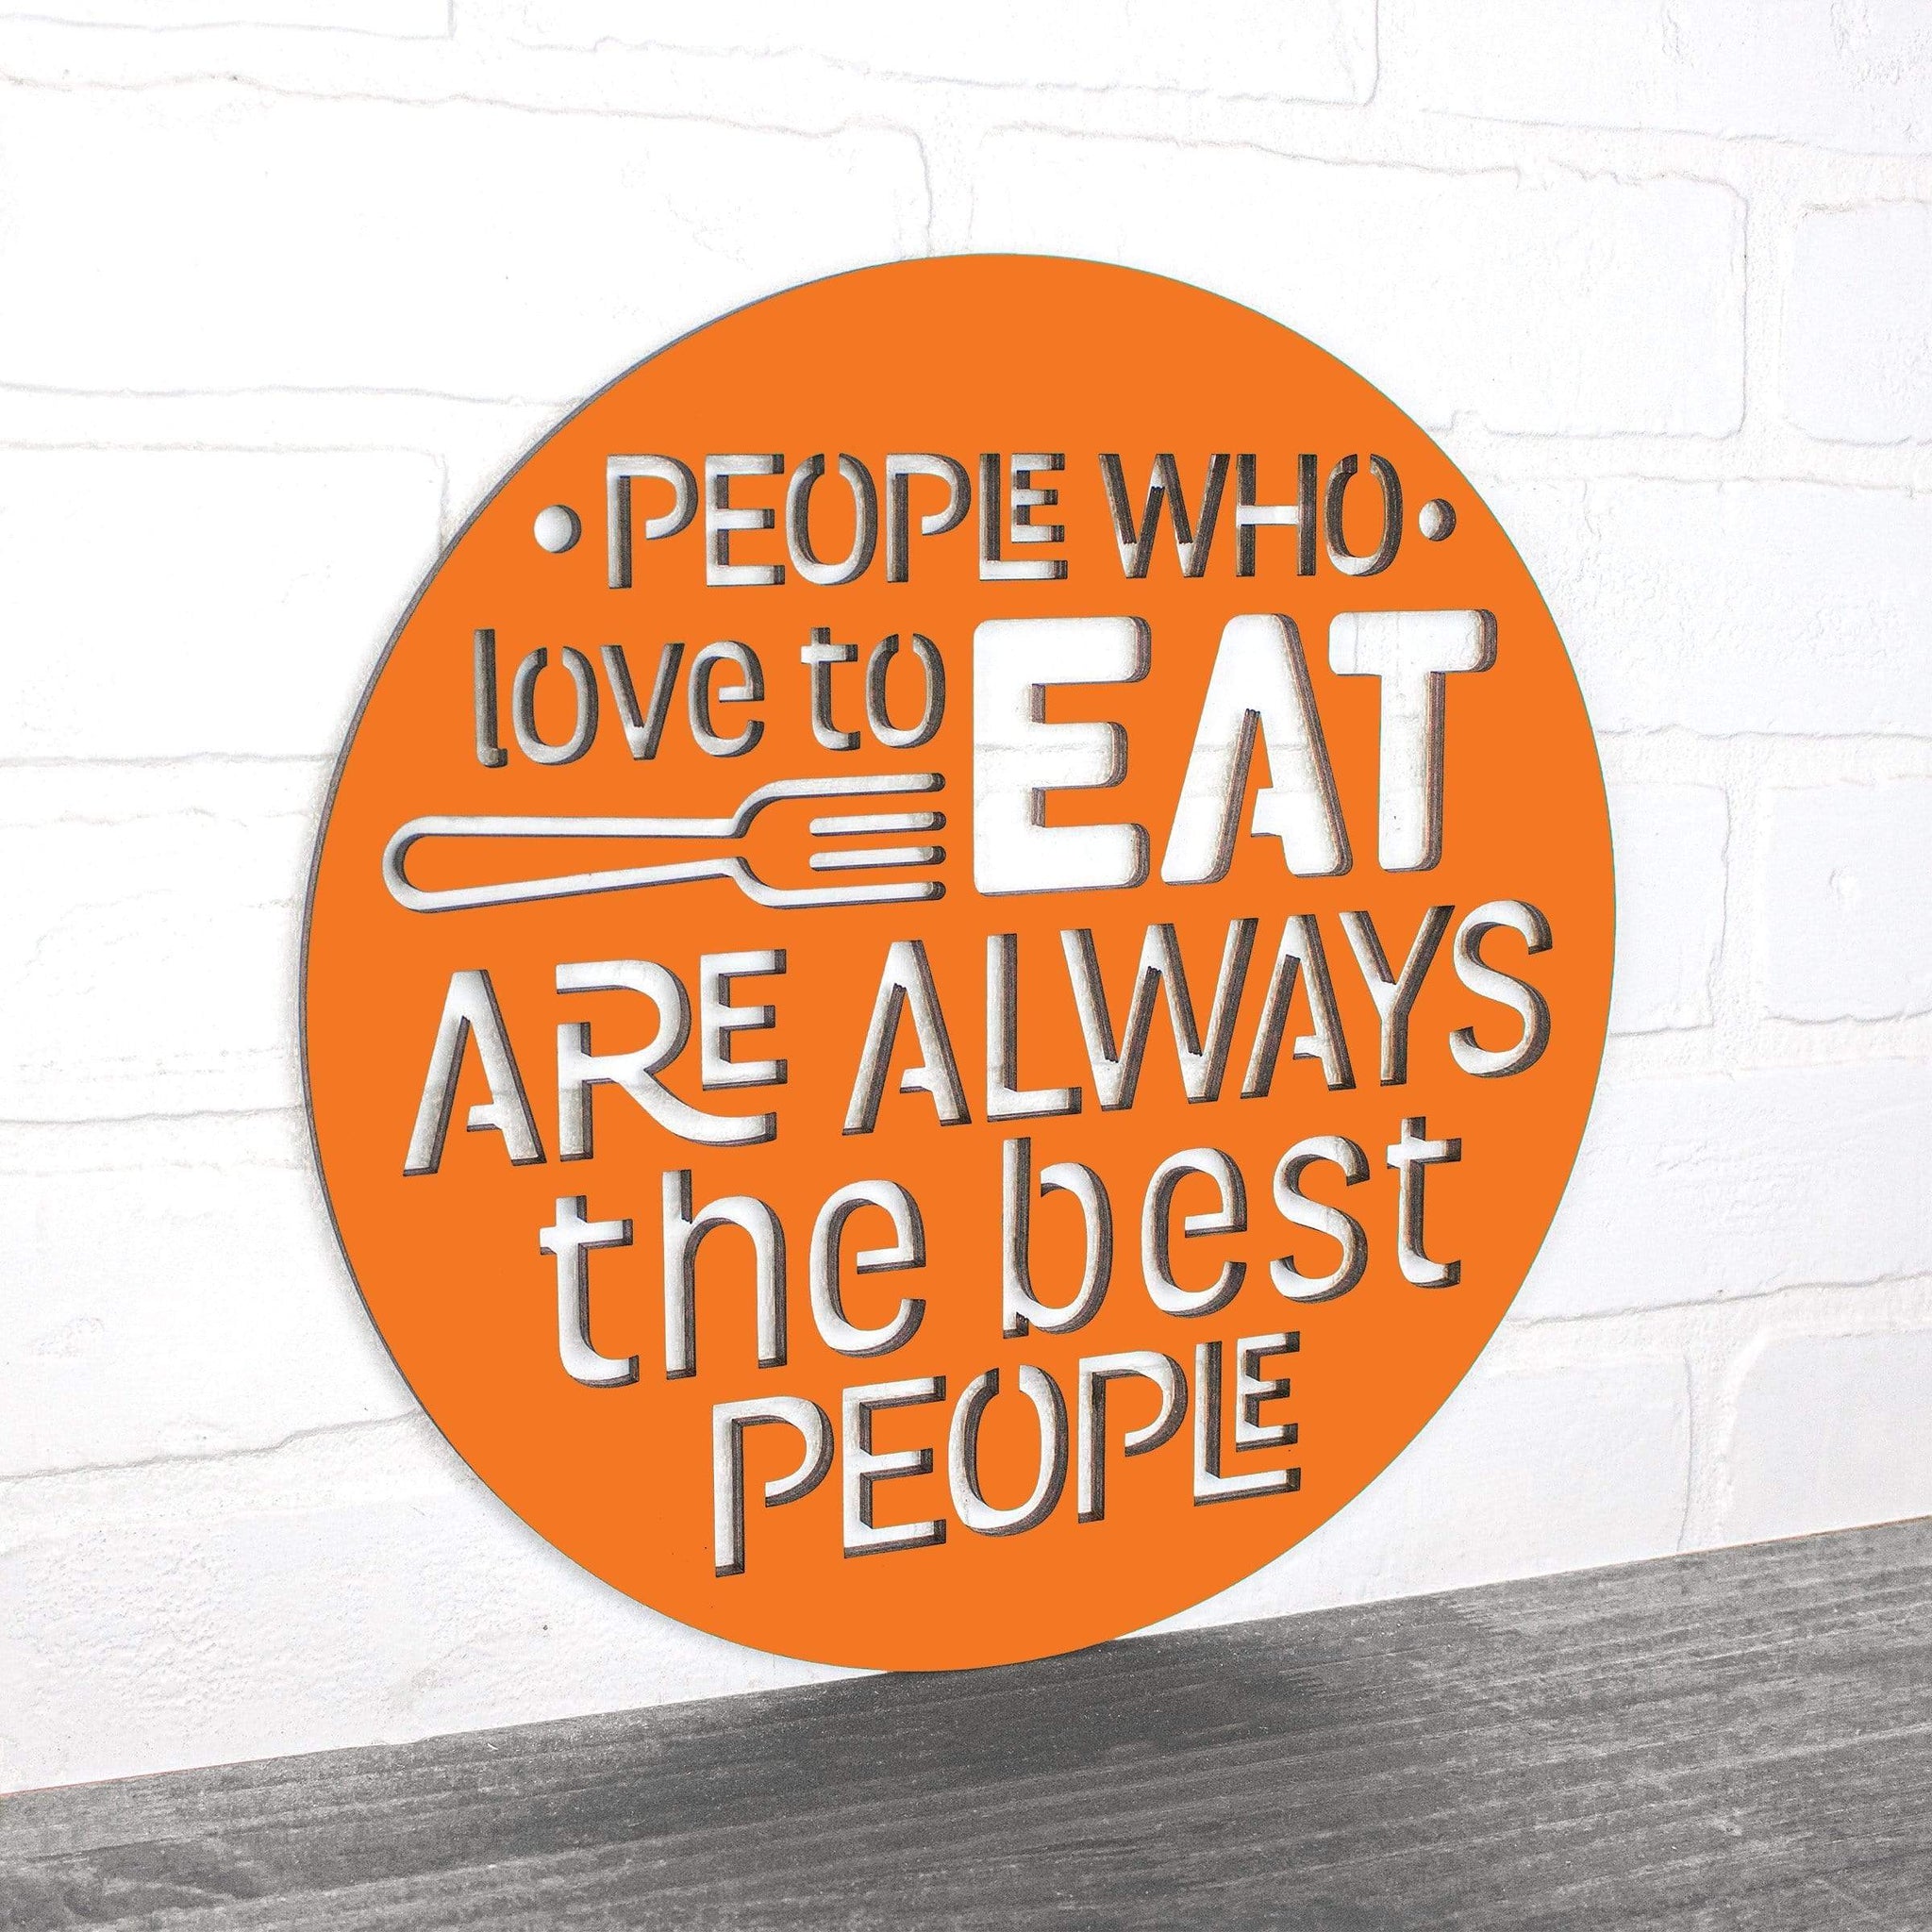 People Eat Love Steel the and Are People Who to Always – Sticks Best